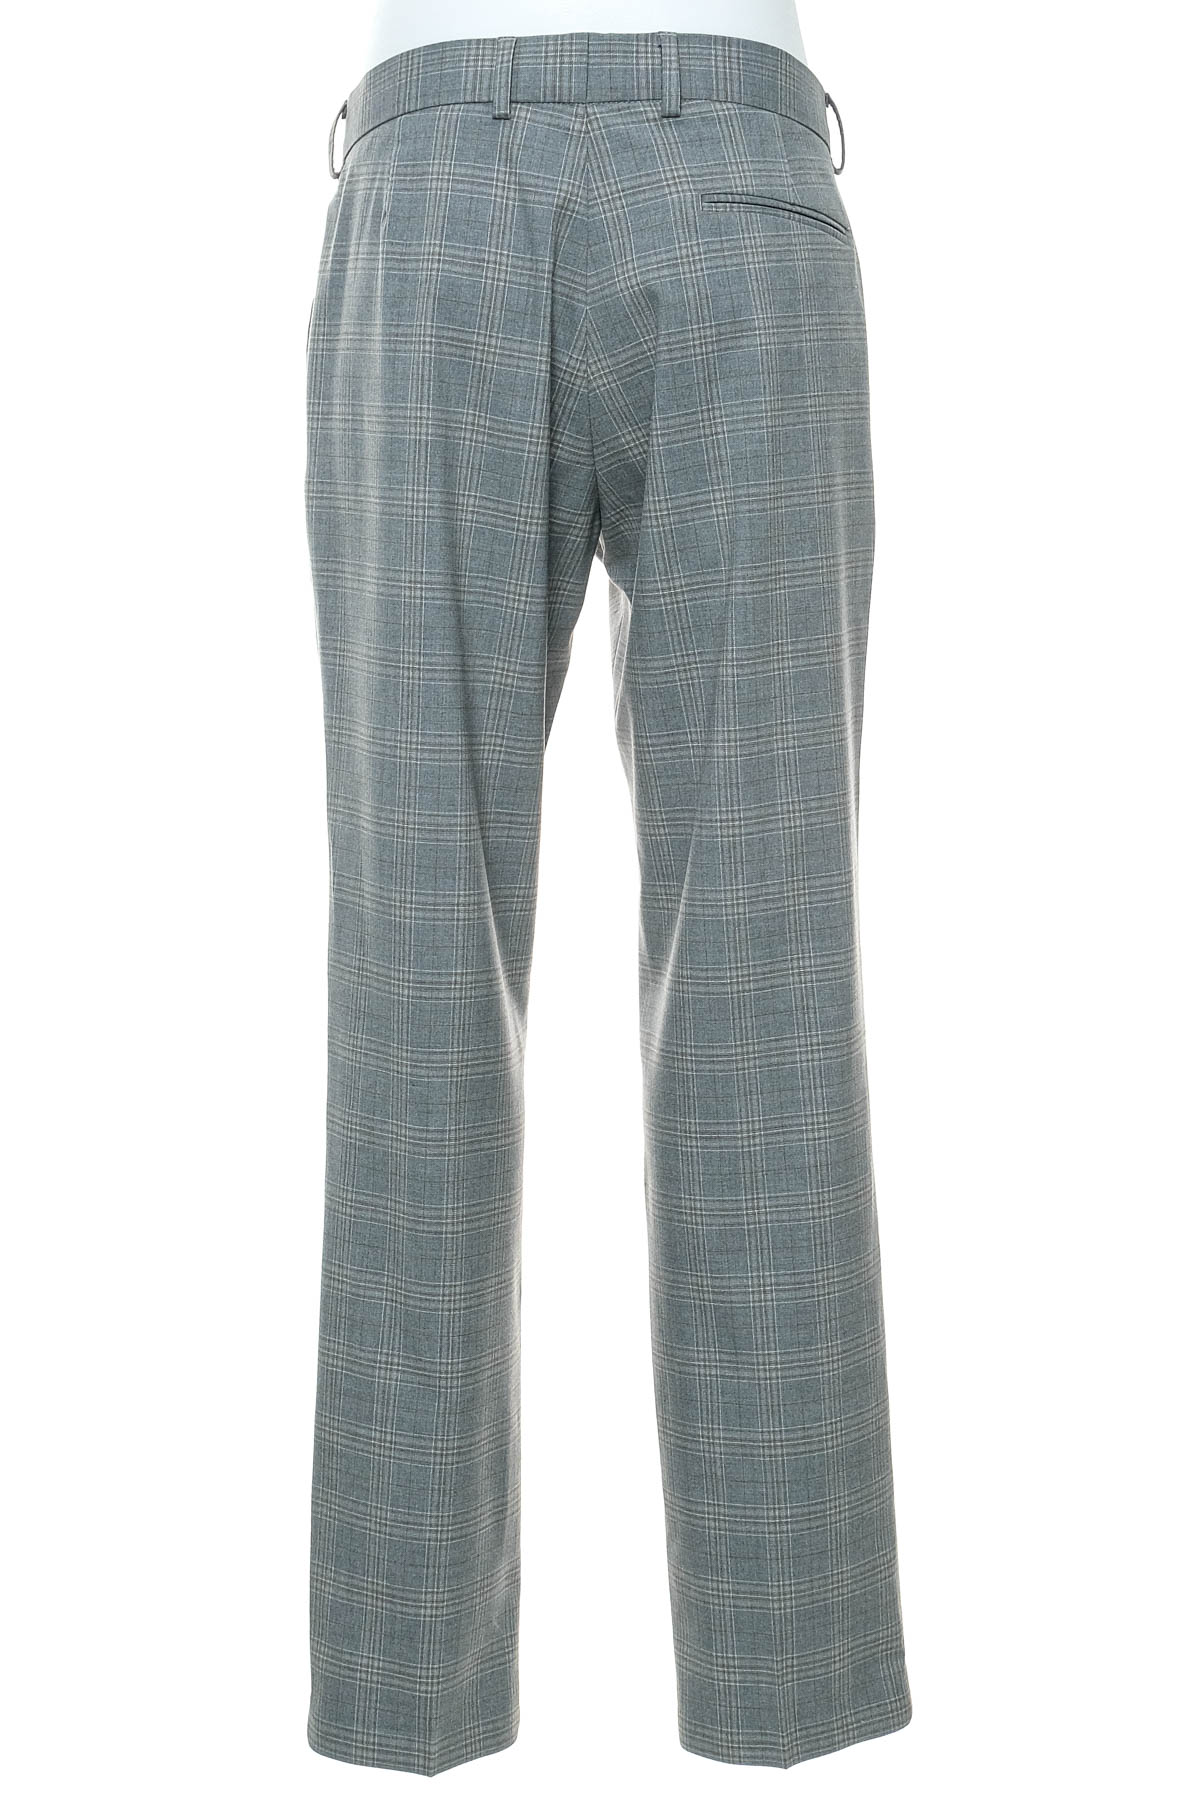 Men's trousers - ISAAC DEWHIRST - 1